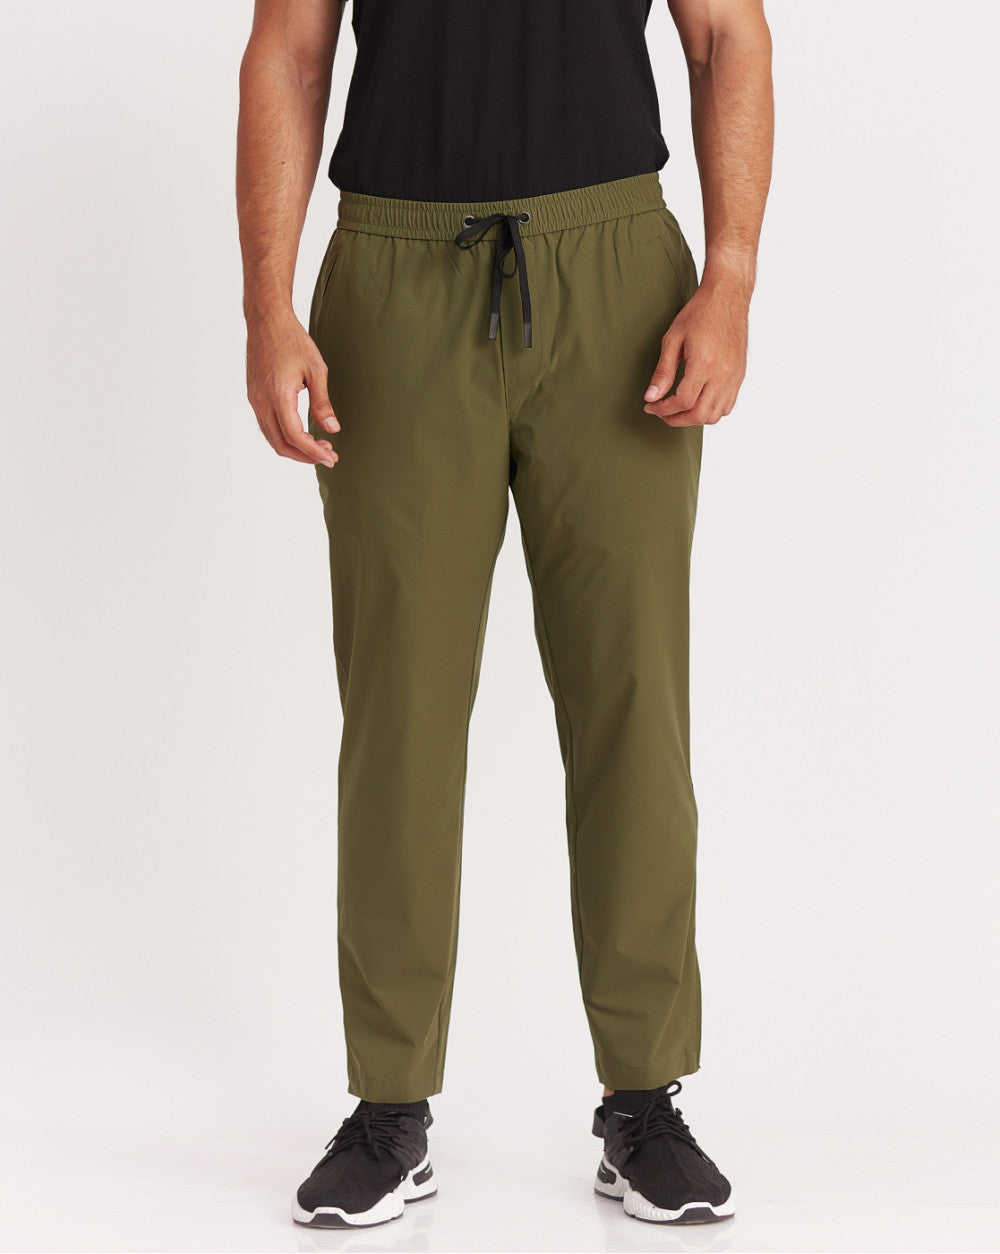 Slim Fit Performance Tech Joggers - Olive